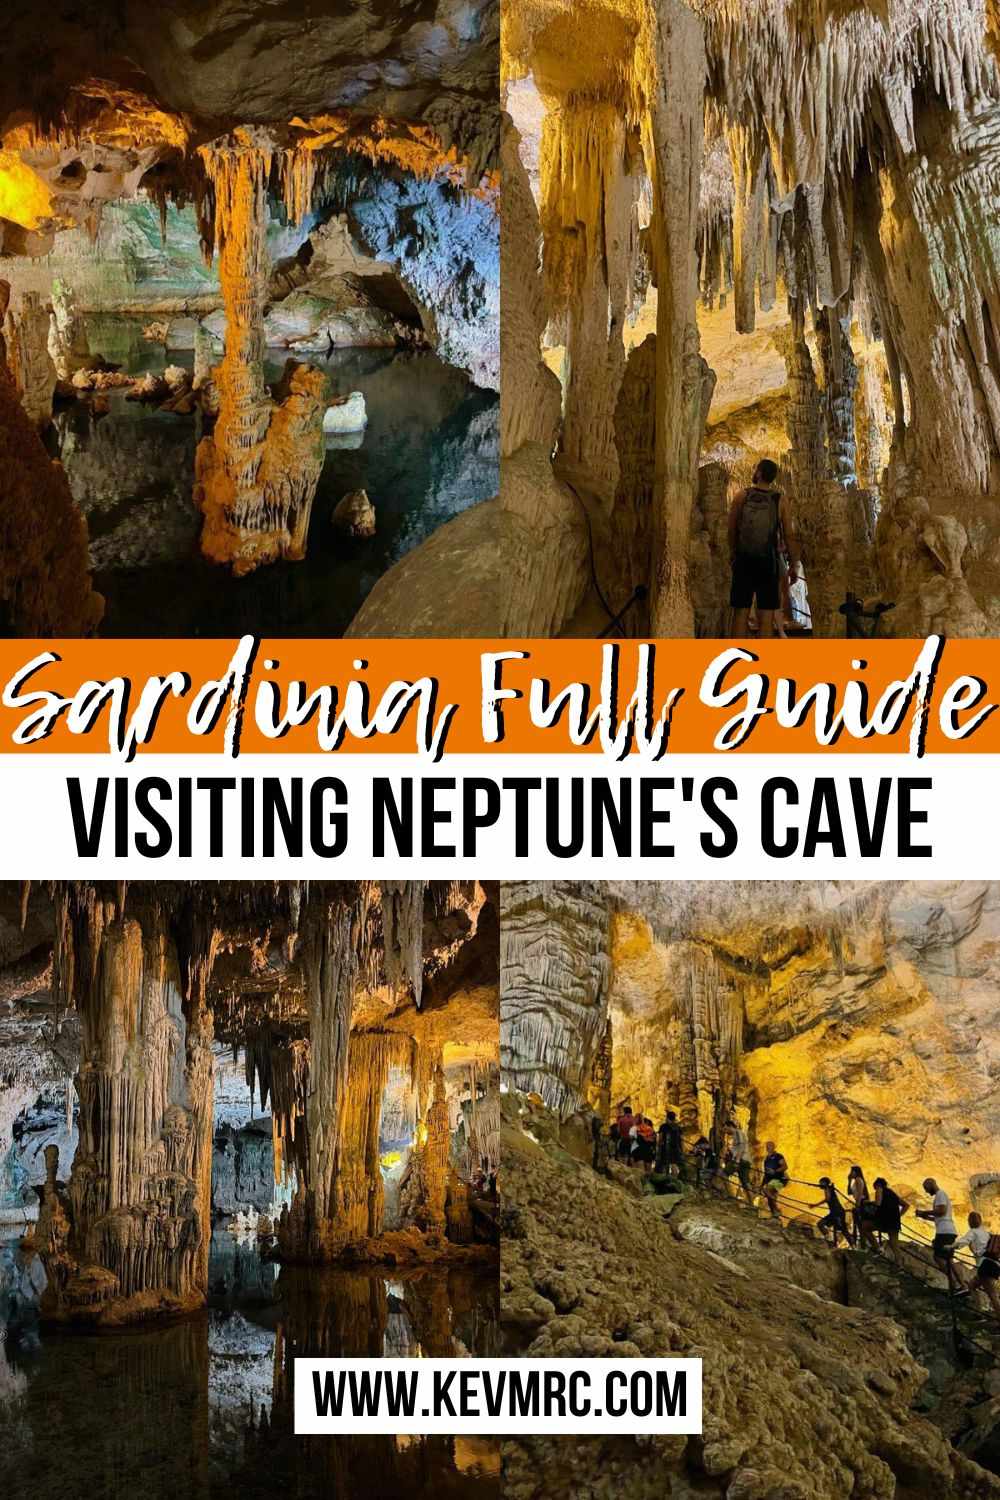 Going to visit Neptune's Grotto in Sardinia? Find out all the information and details you need to visit this incredible cave. neptune cave sardinia | neptune's cave | neptunes grotto #sardinia #sardiniaitaly